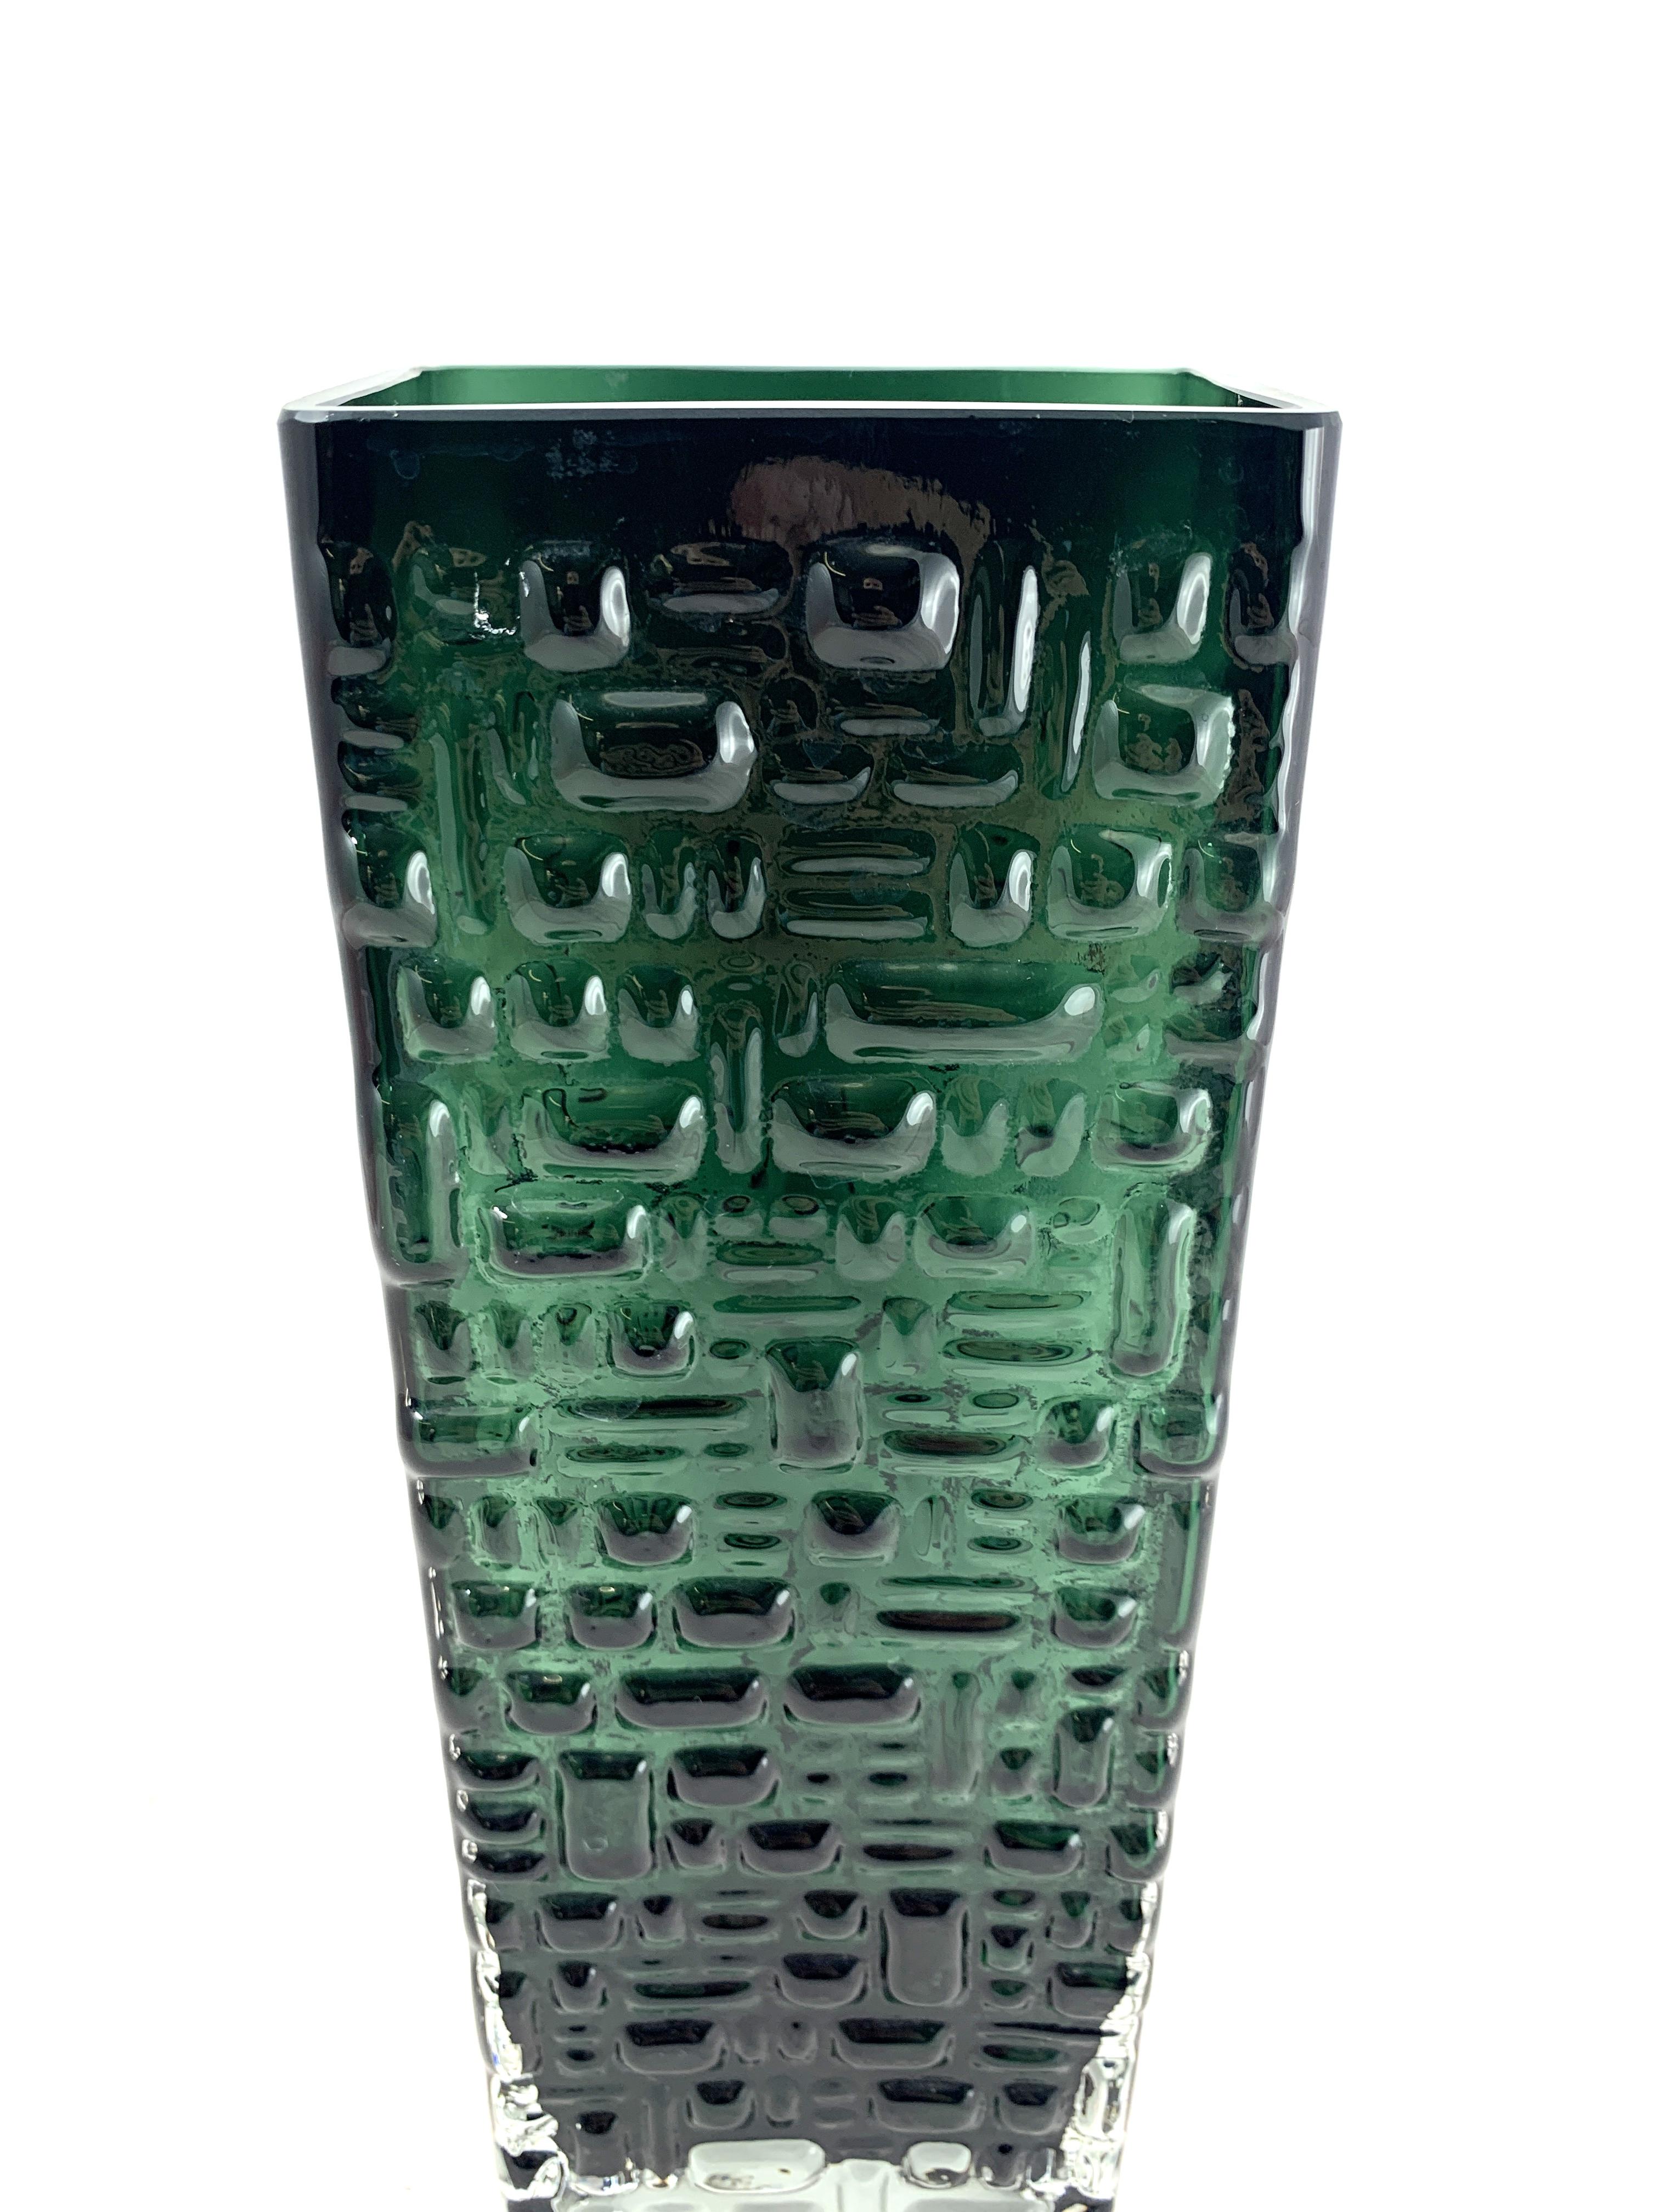 Wonderful Mid-Century Modern German emerald green glass vase with geometric relief pattern by Gral Glass, designed by Emil Funke, circa 1970.